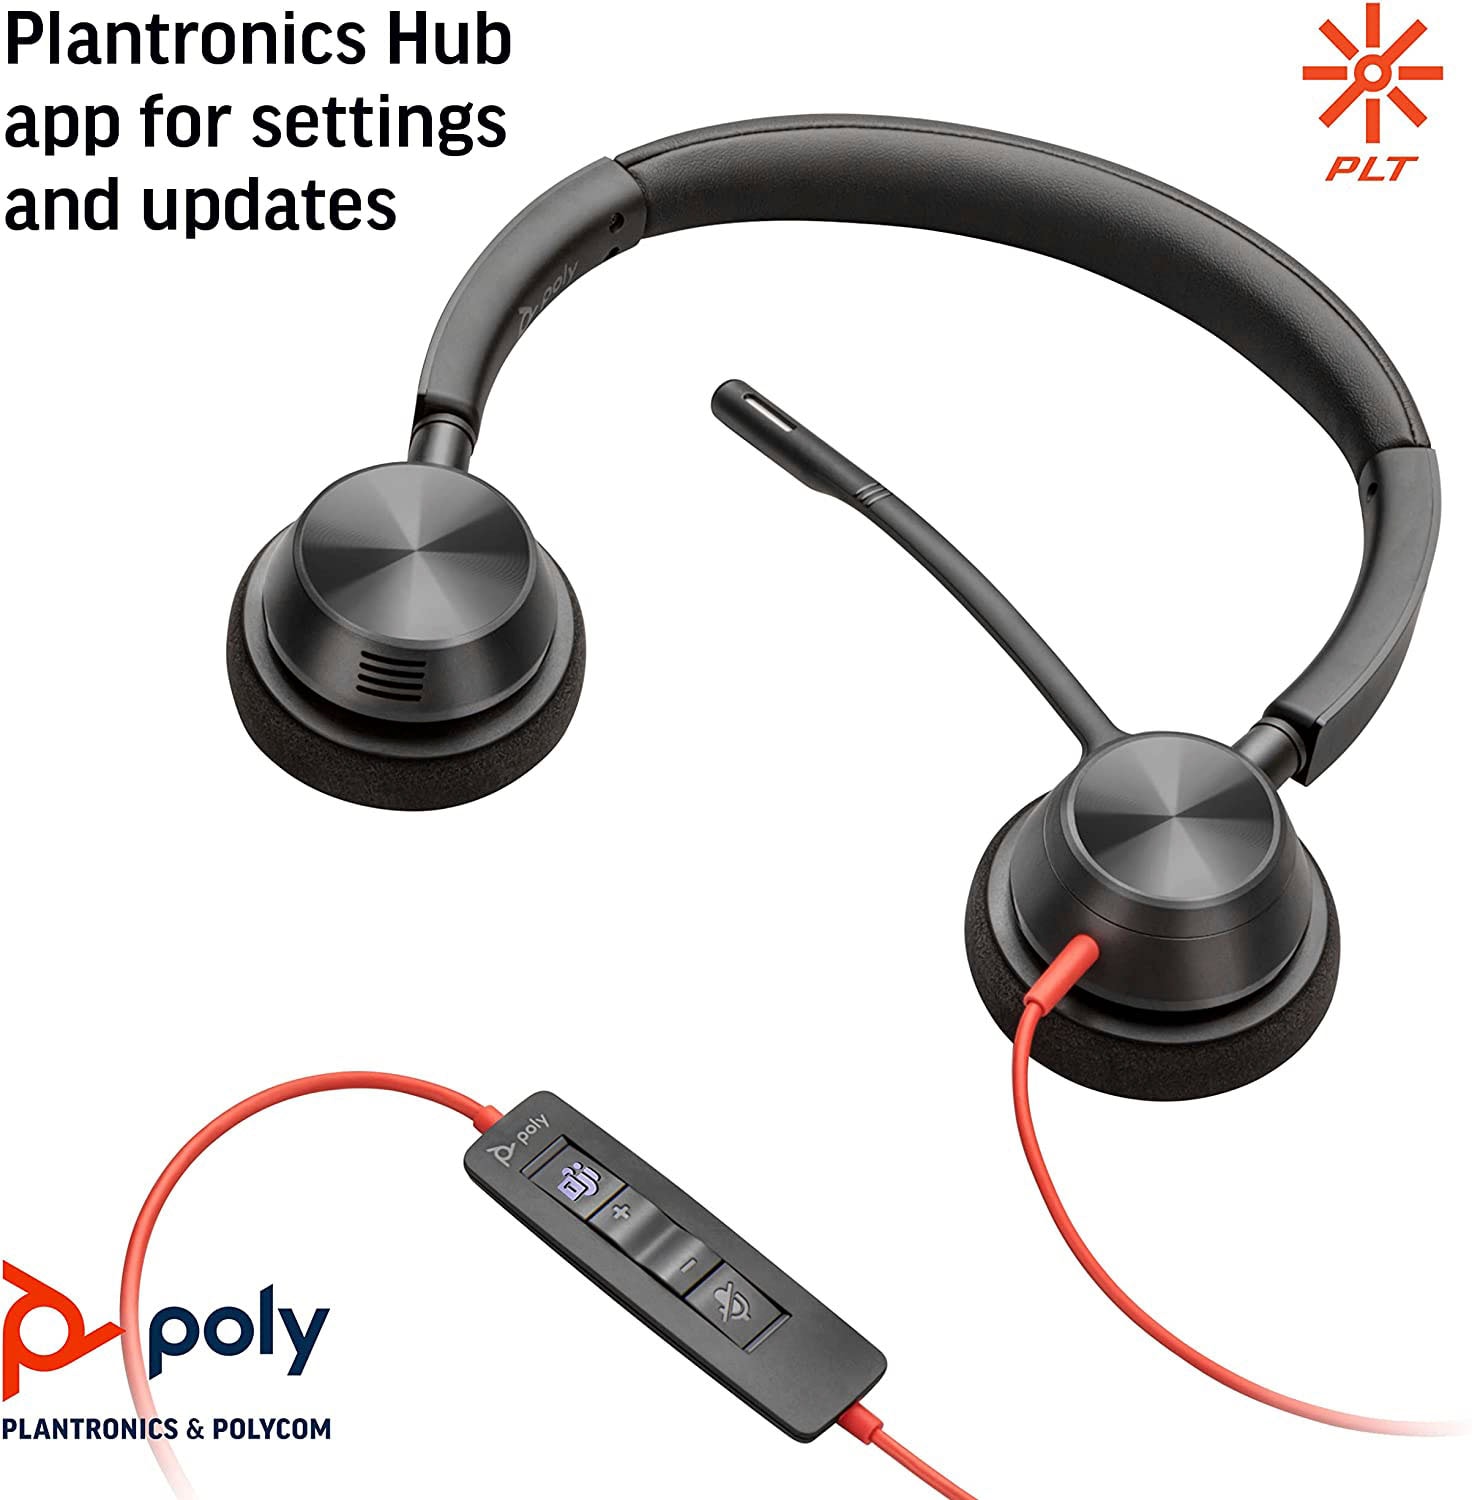 OTTO jetzt 3325«, Poly Noise-Cancelling Headset »Blackwire bei online